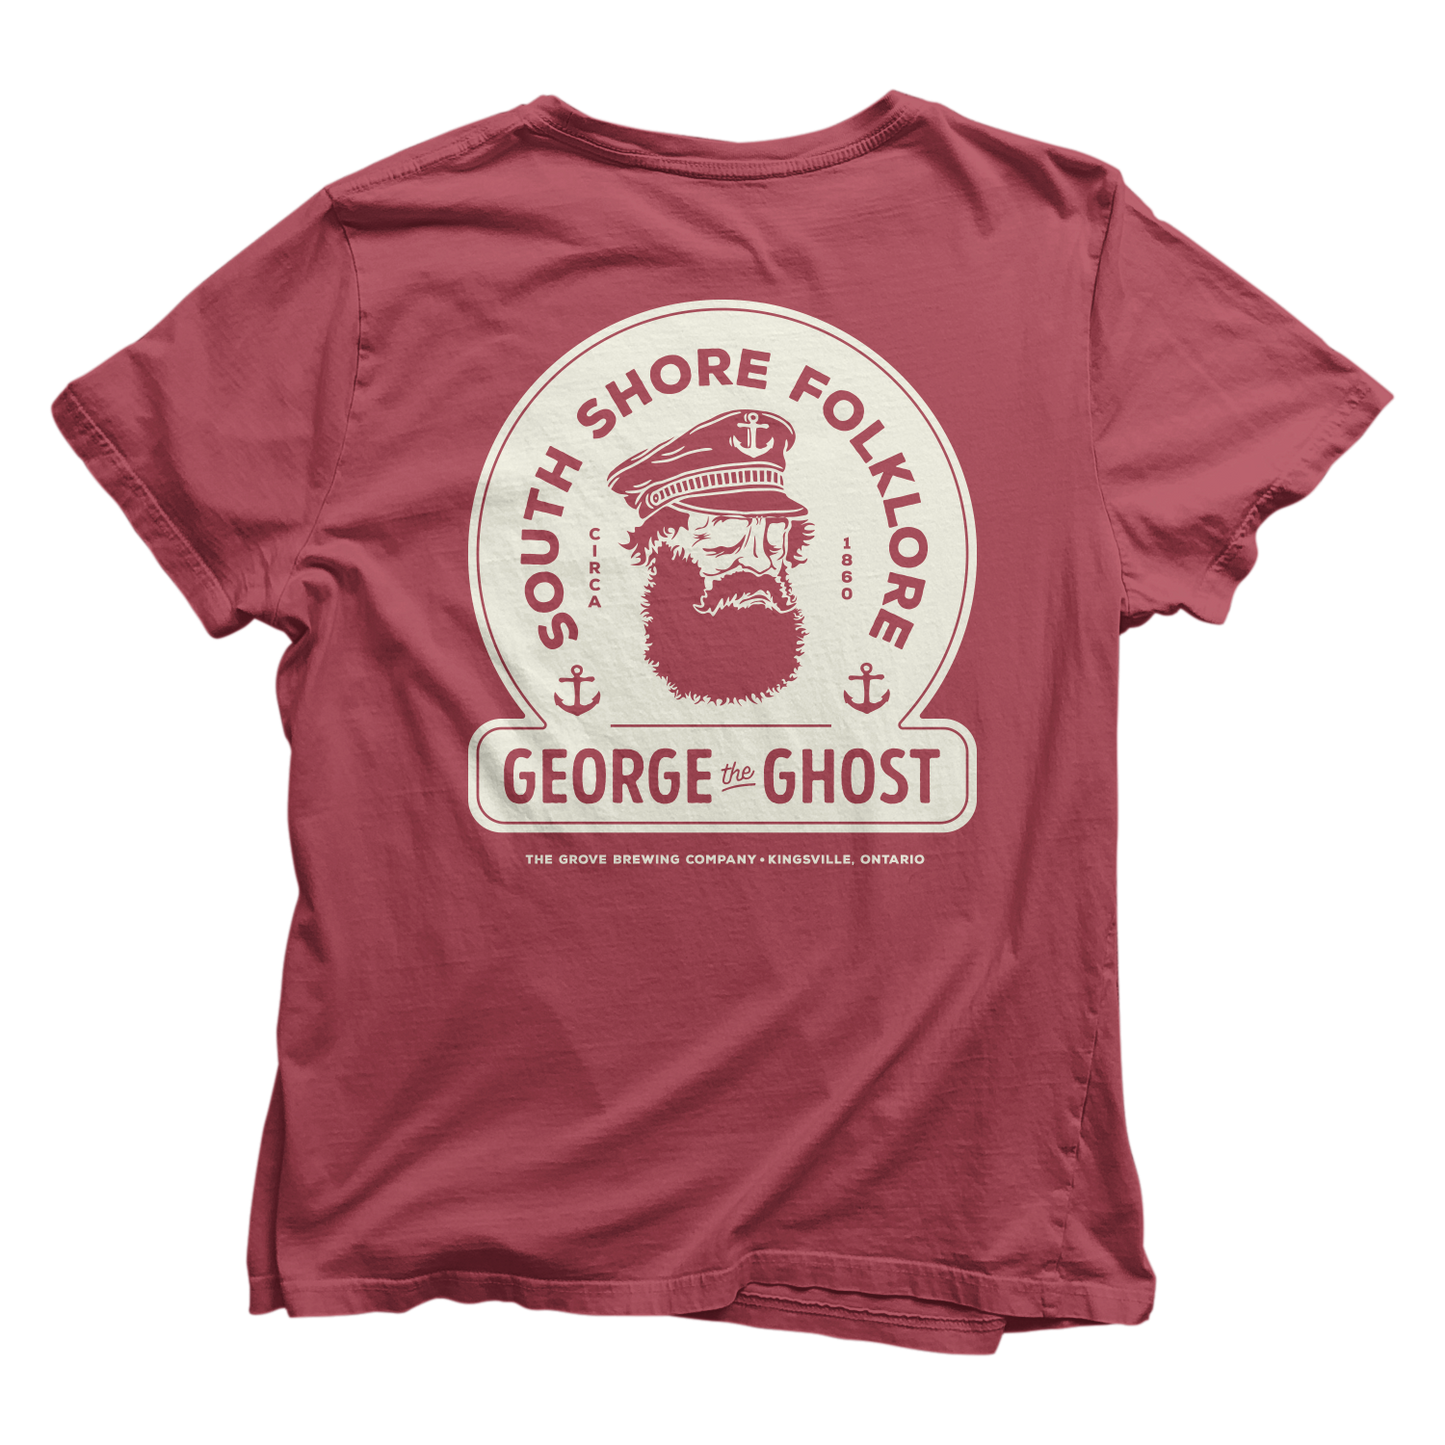 George the Ghost Shirt